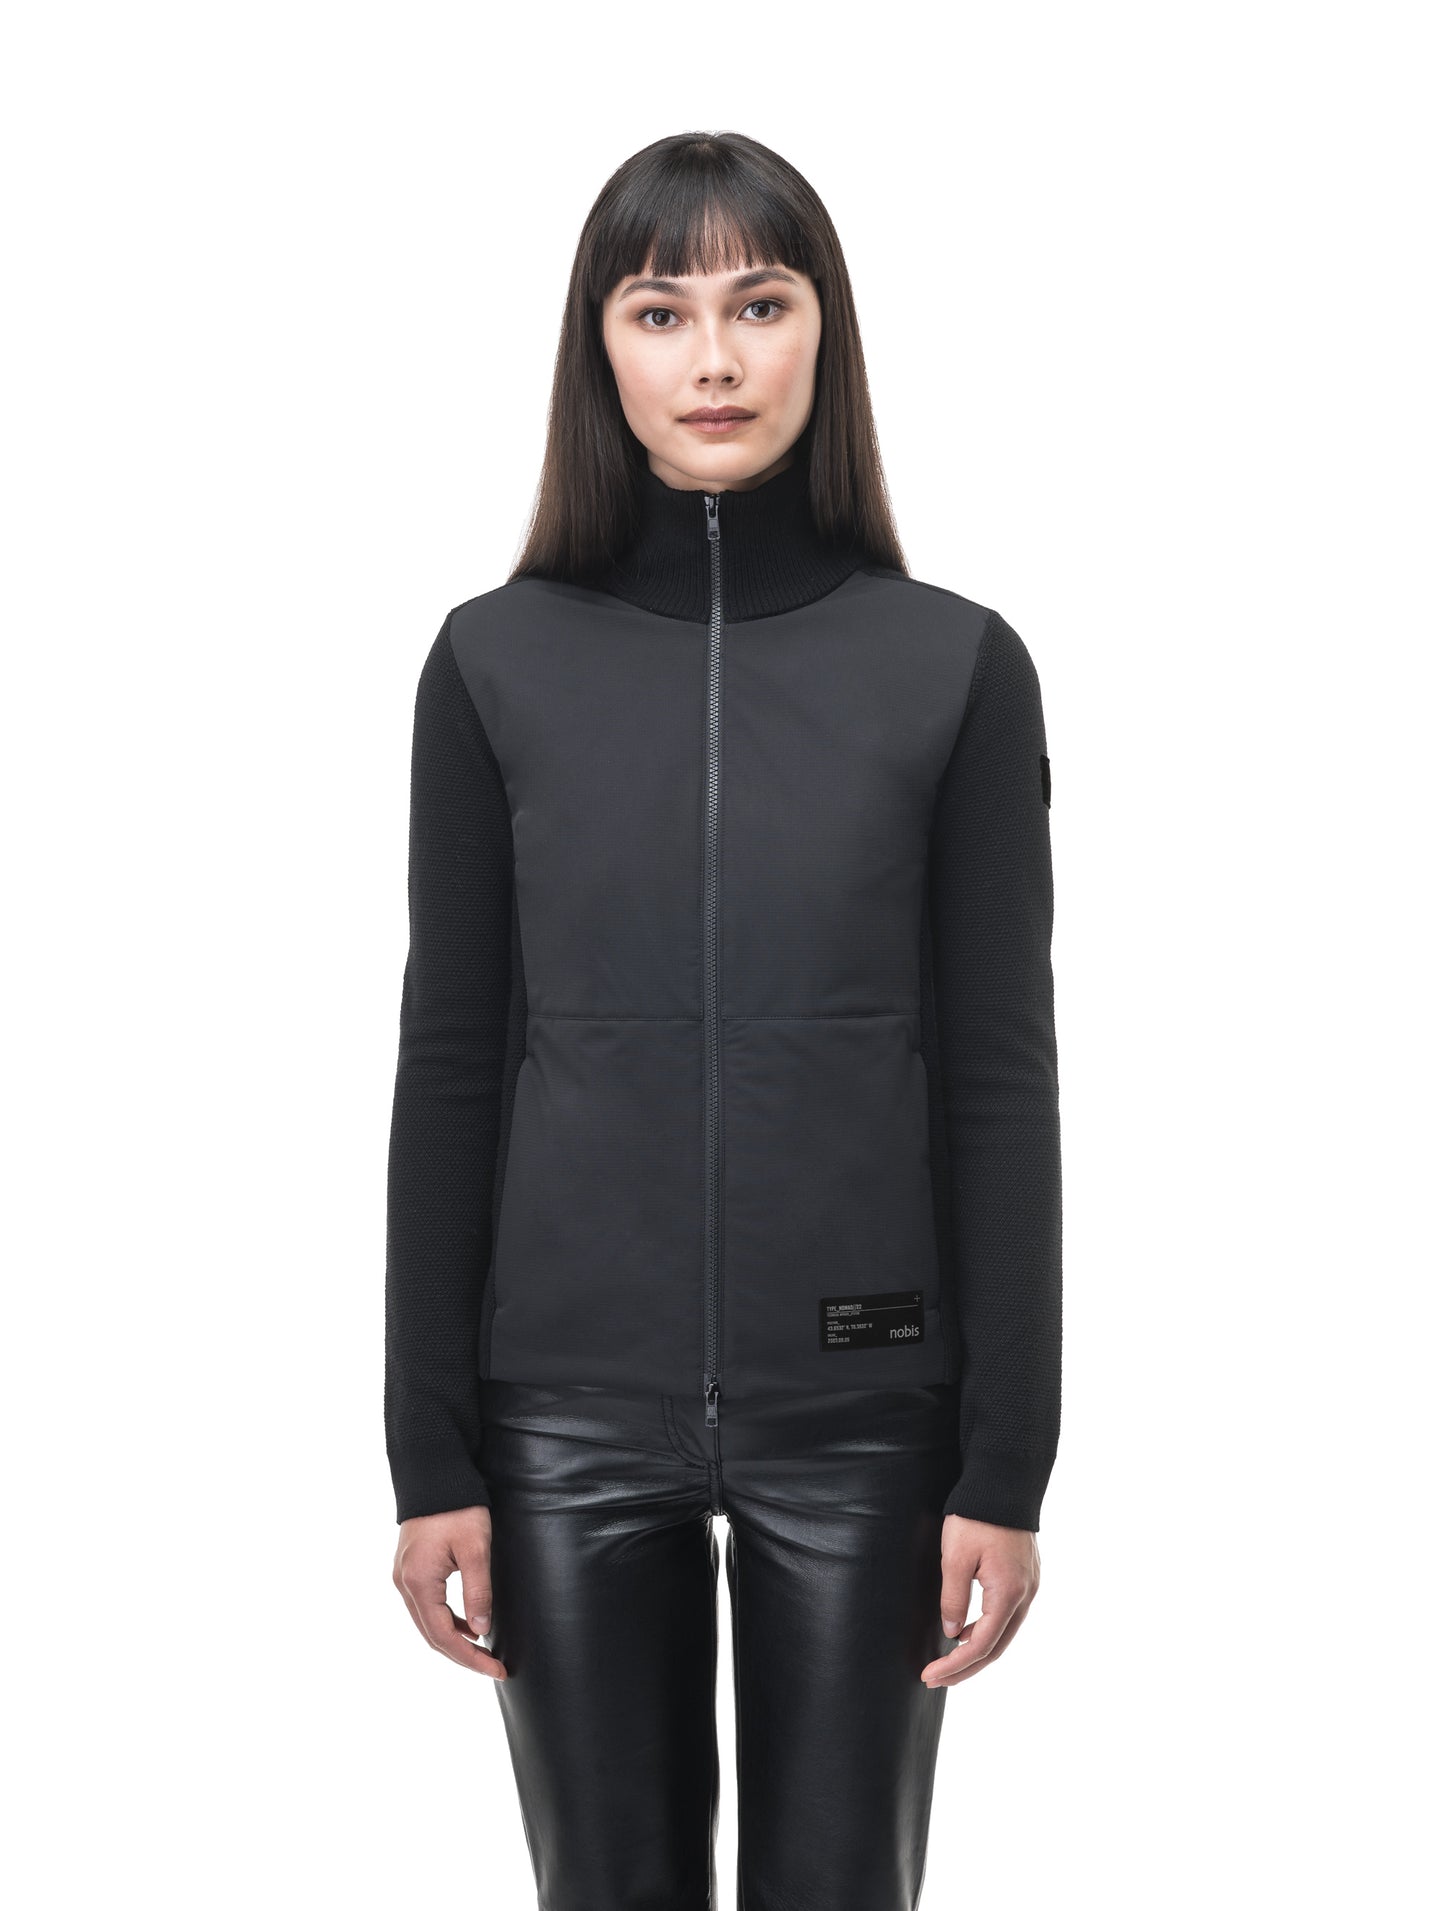 Evo Ladies Performance Full Zip Sweater in hip length, Primaloft Gold Insulation Active+, Merion wool knit collar, sleeves, back, and cuffs, two-way front zipper, and hidden waist pockets, in Black